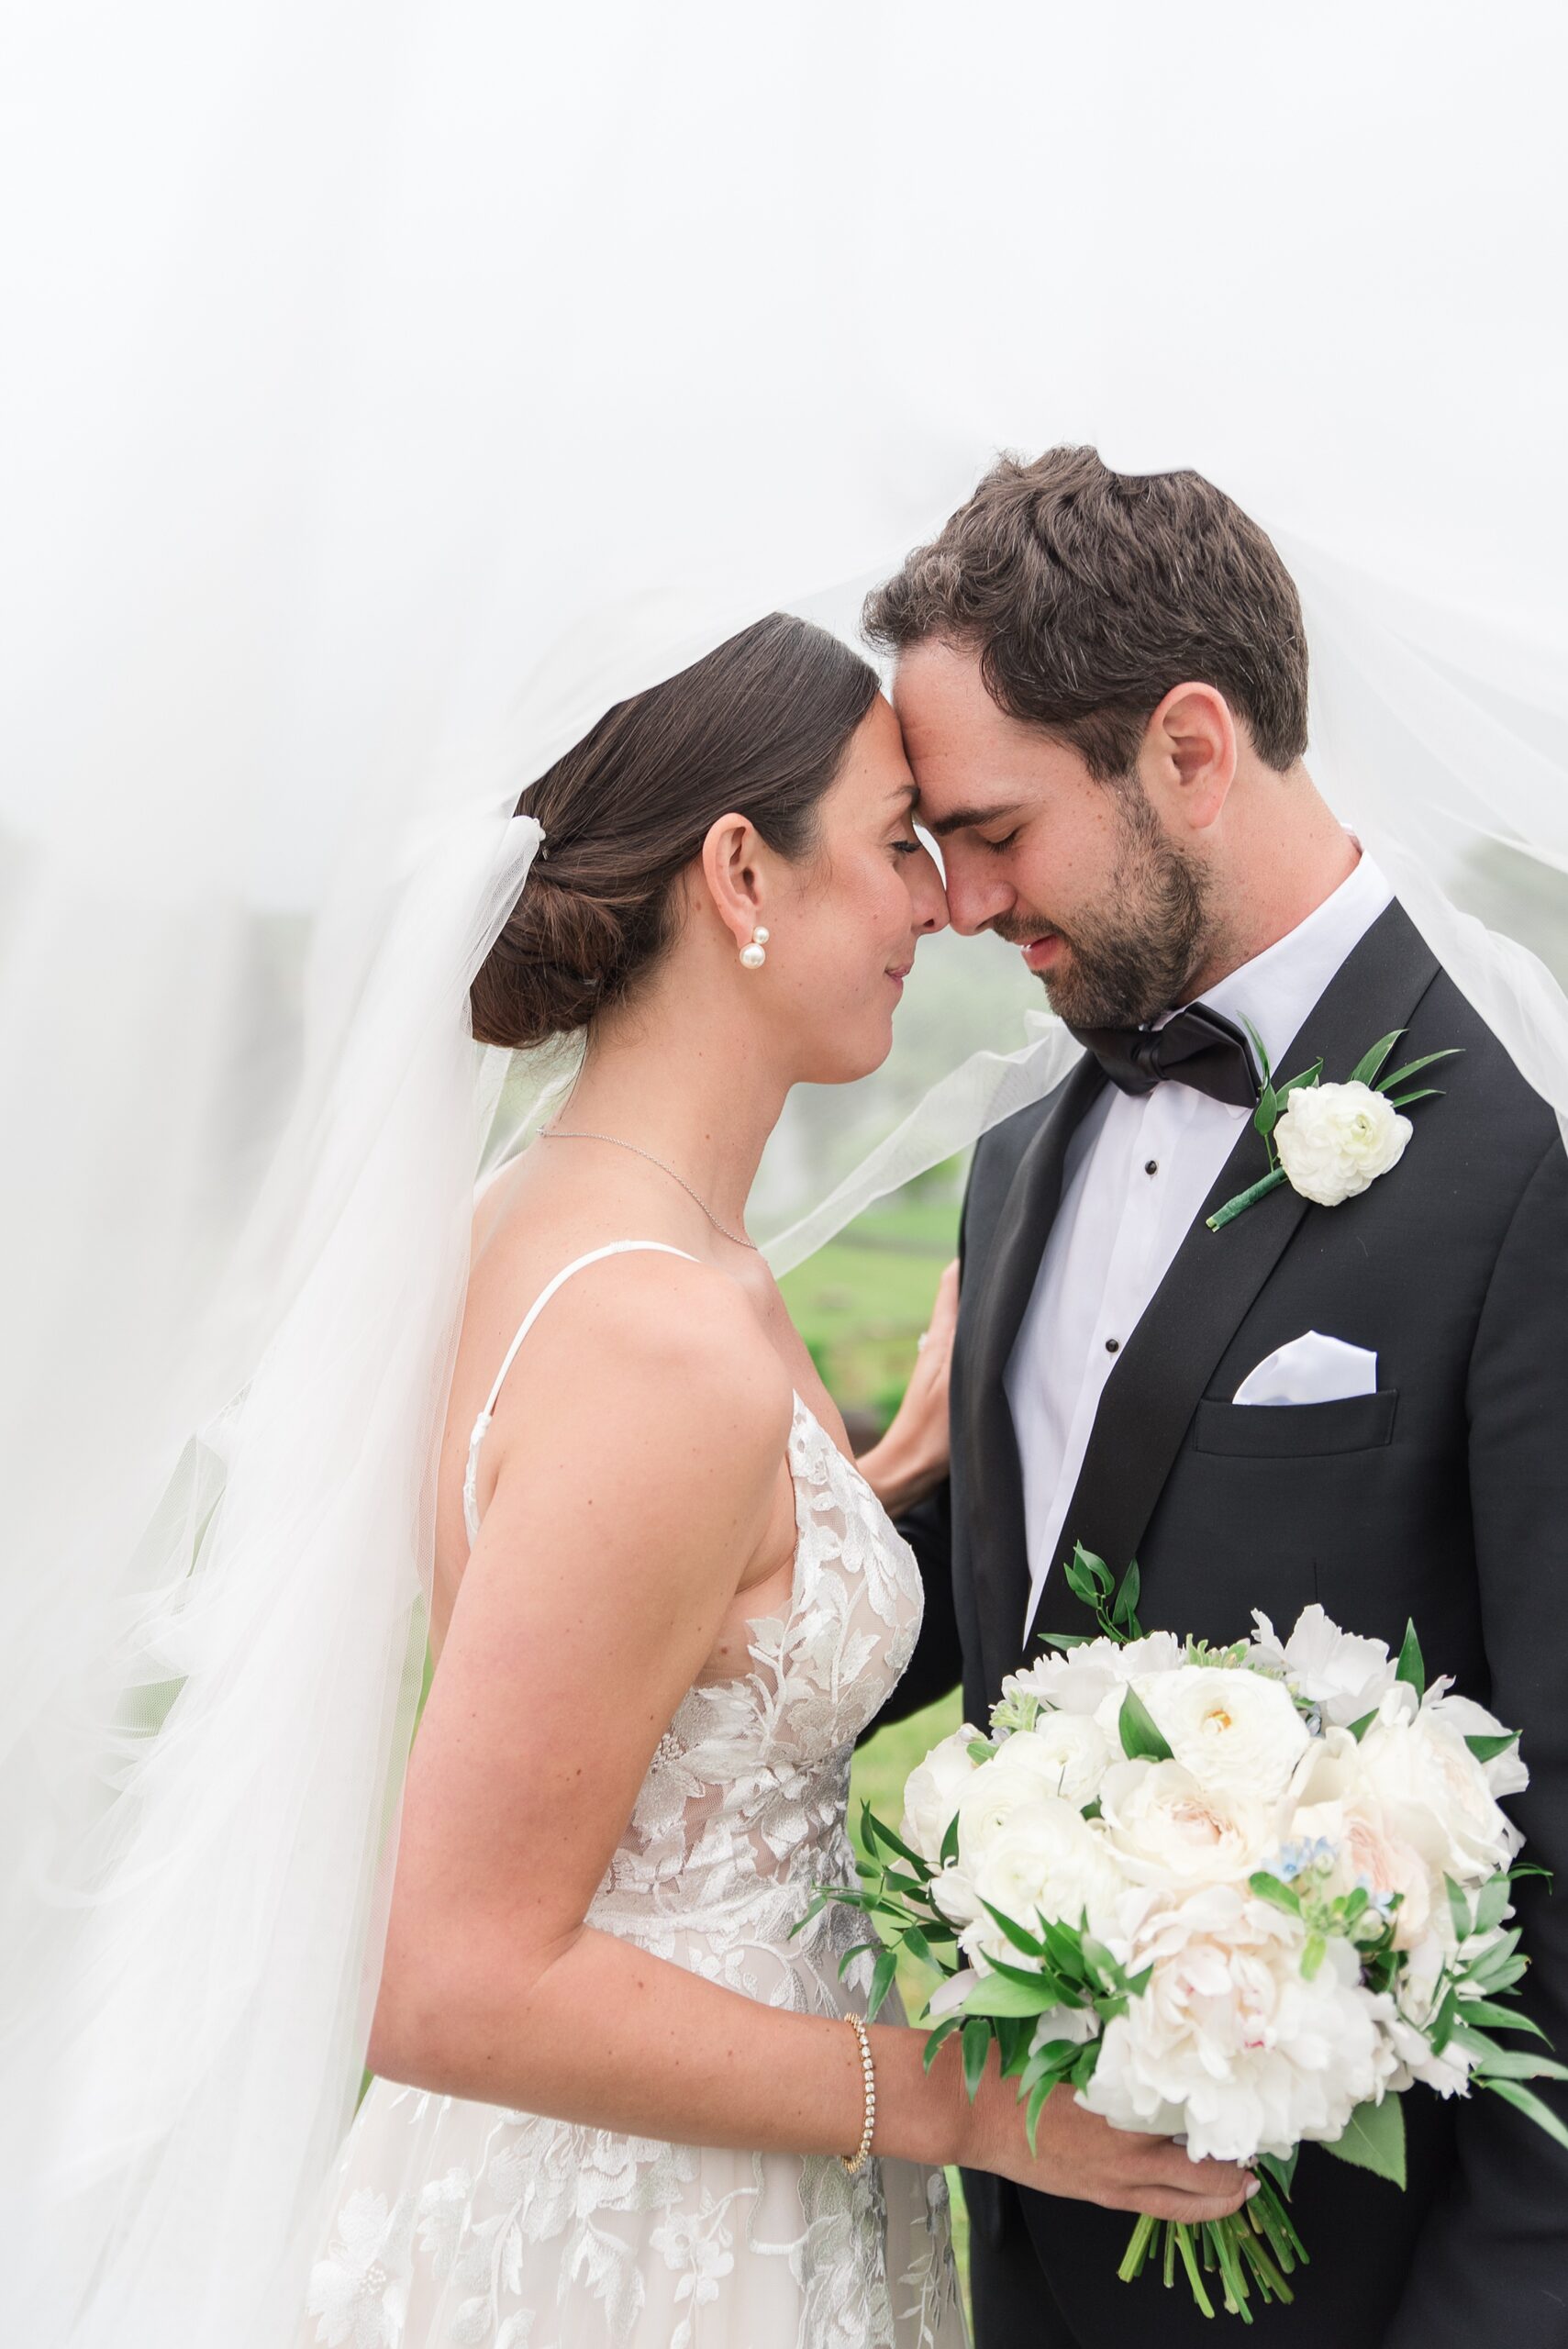 Newlyweds touch foreheads and smile while hiding under a veil at their Gramercy Mansion wedding